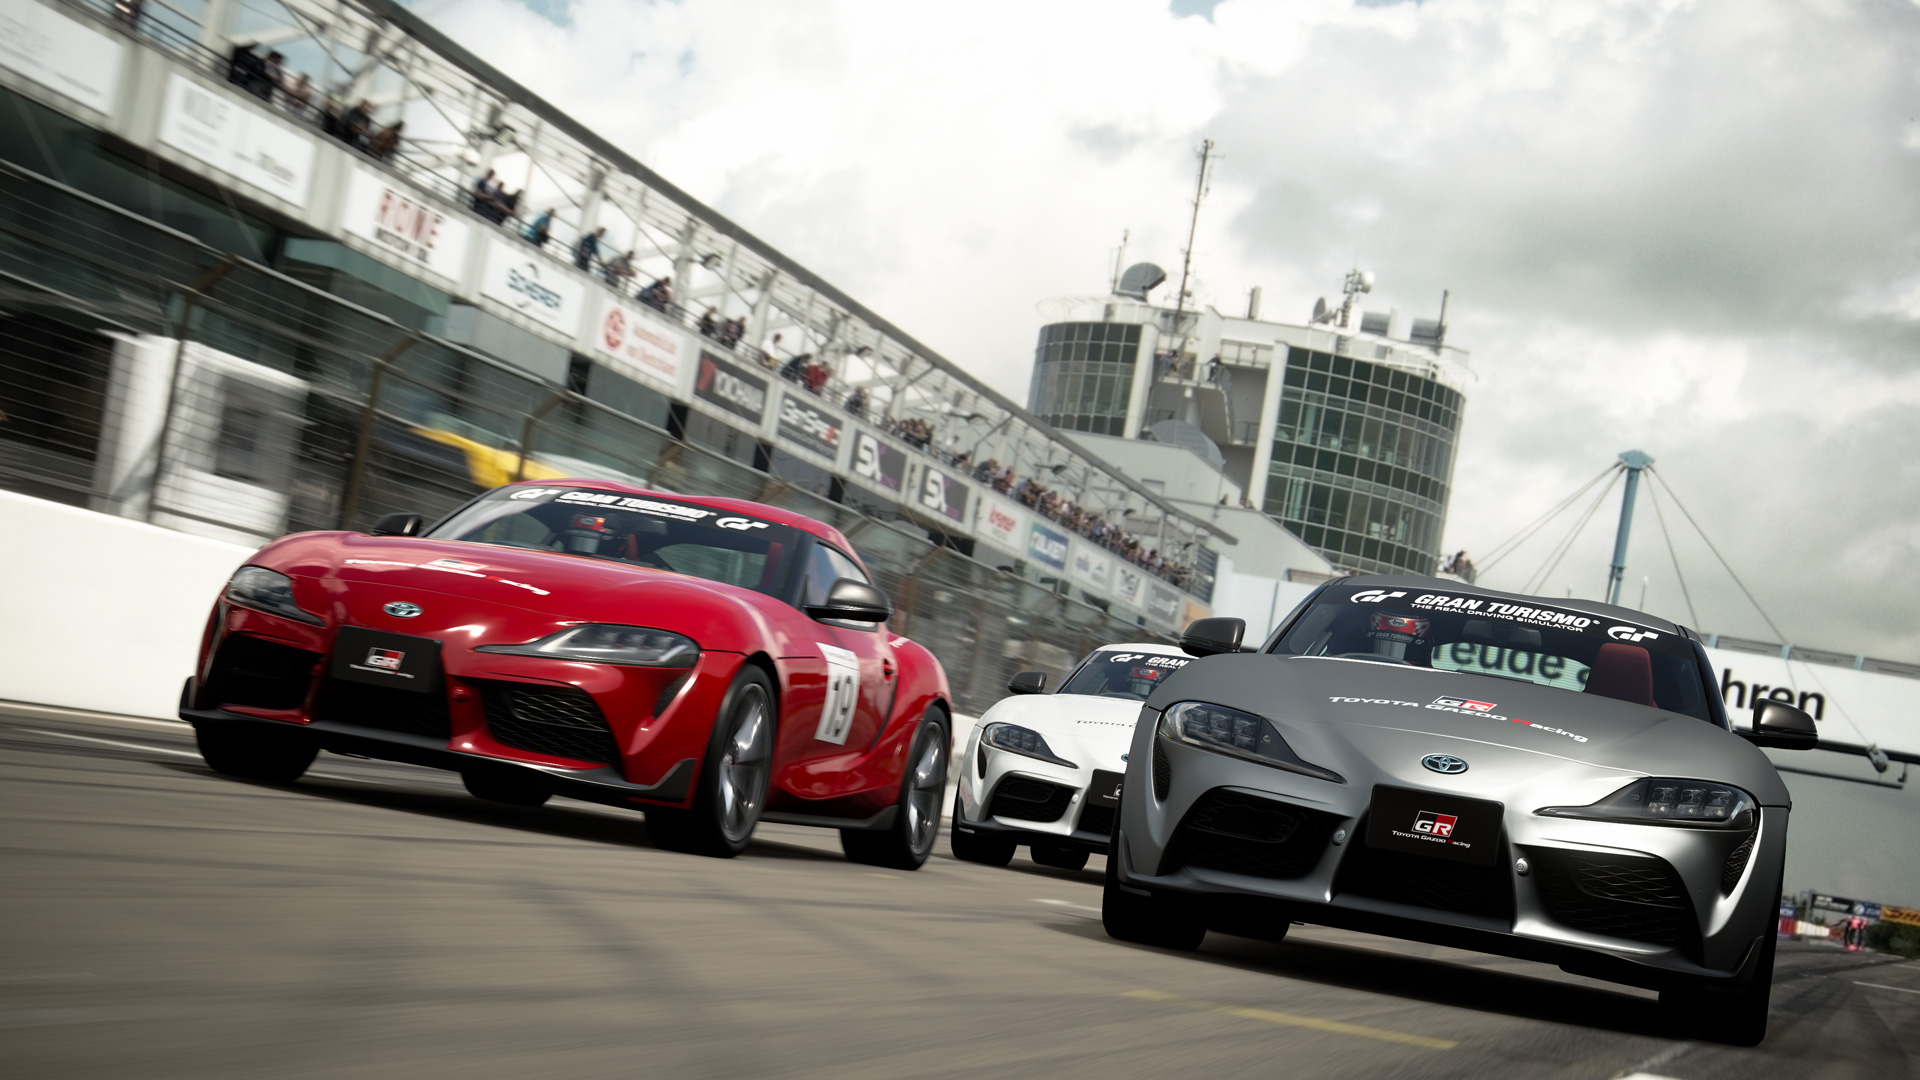 Introducing The Gr Supra Gt Cup From Toyota Gazoo Racing Now An Official Partner Of The Fia Gt Championships Hirek Gran Turismo Com